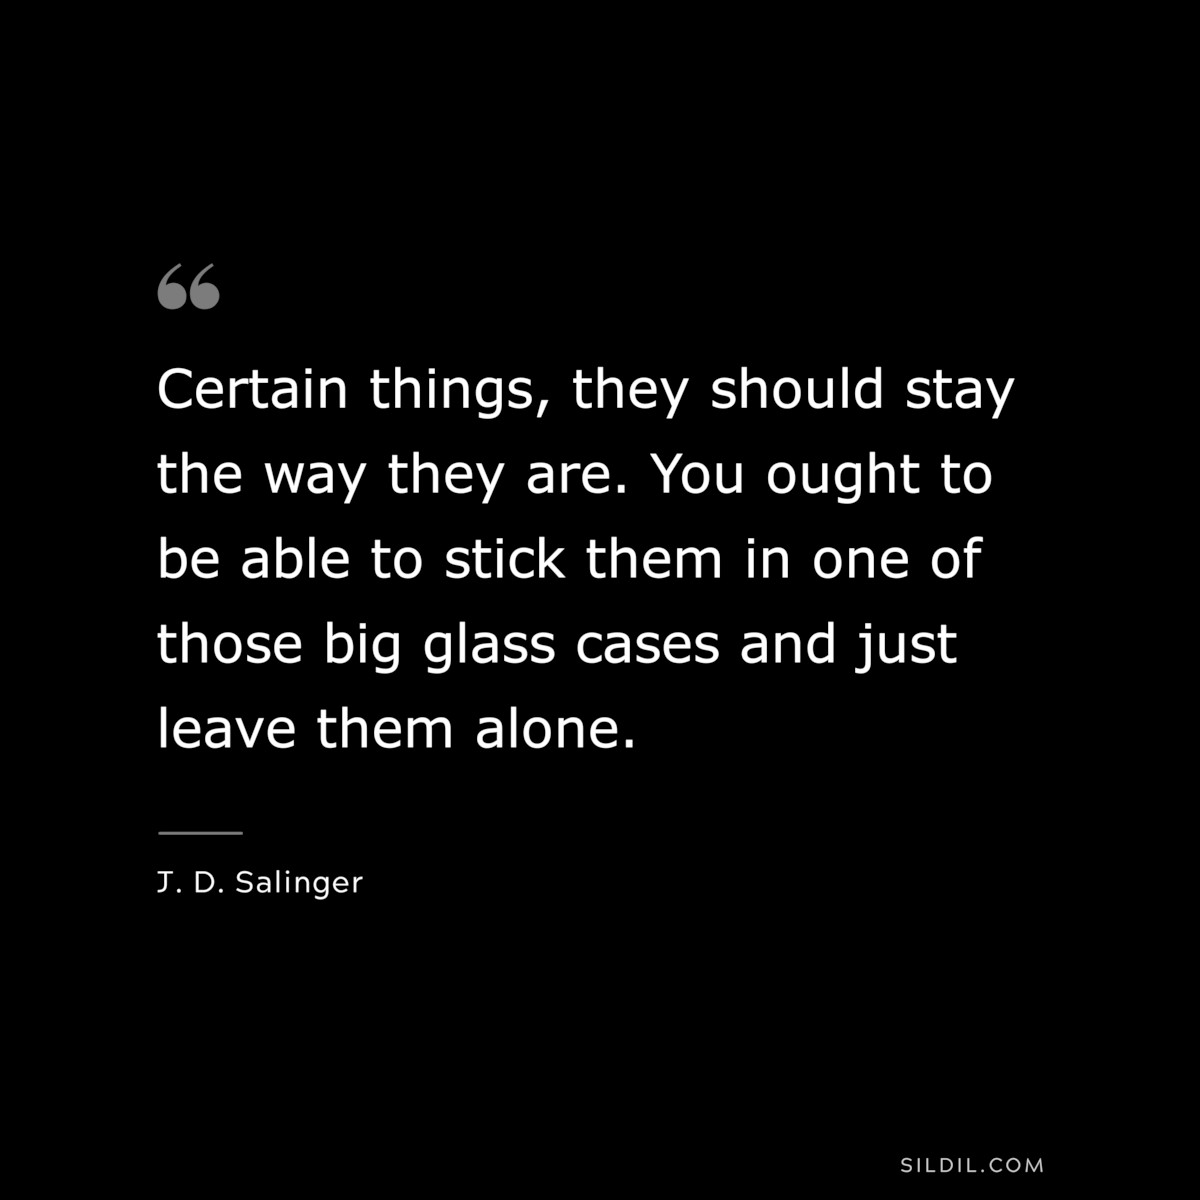 Certain things, they should stay the way they are. You ought to be able to stick them in one of those big glass cases and just leave them alone. — J. D. Salinger